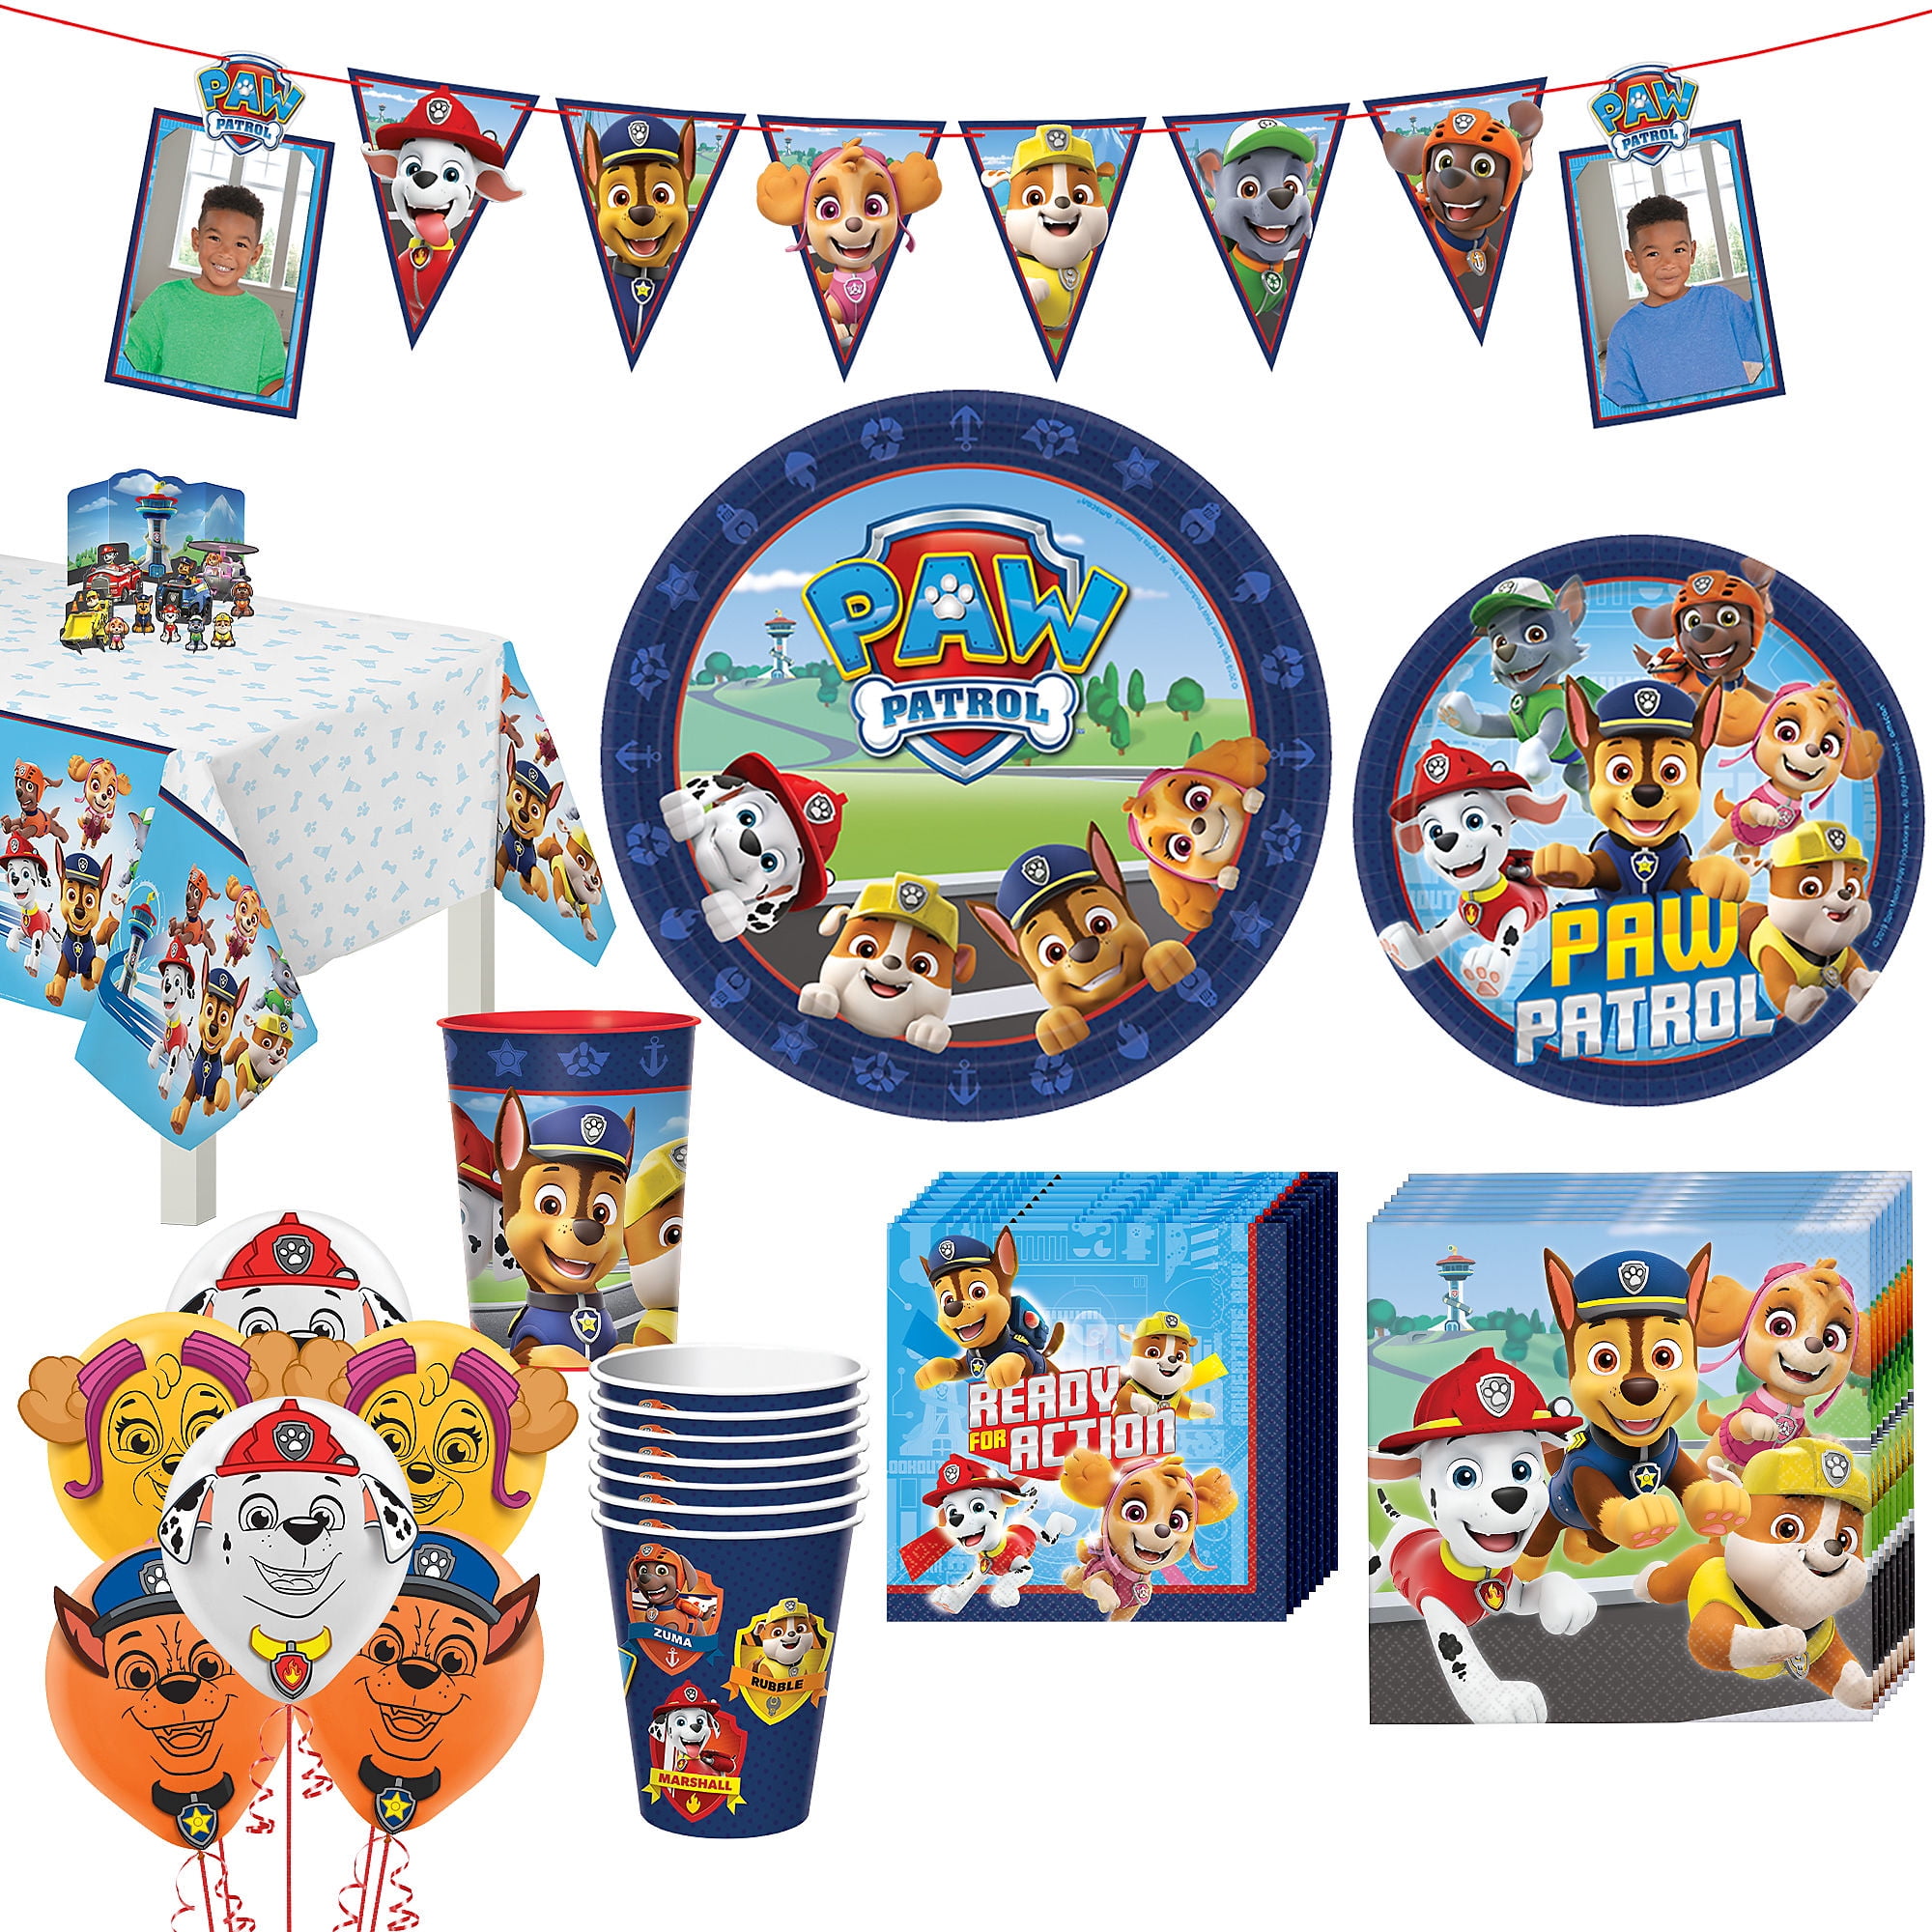 Tattoos Cups Banner Decoration Table Cover Dinner and Cake Plates Napkins Paw Patrol Theme Birthday Party Supplies Set Candles Button Serves 8 